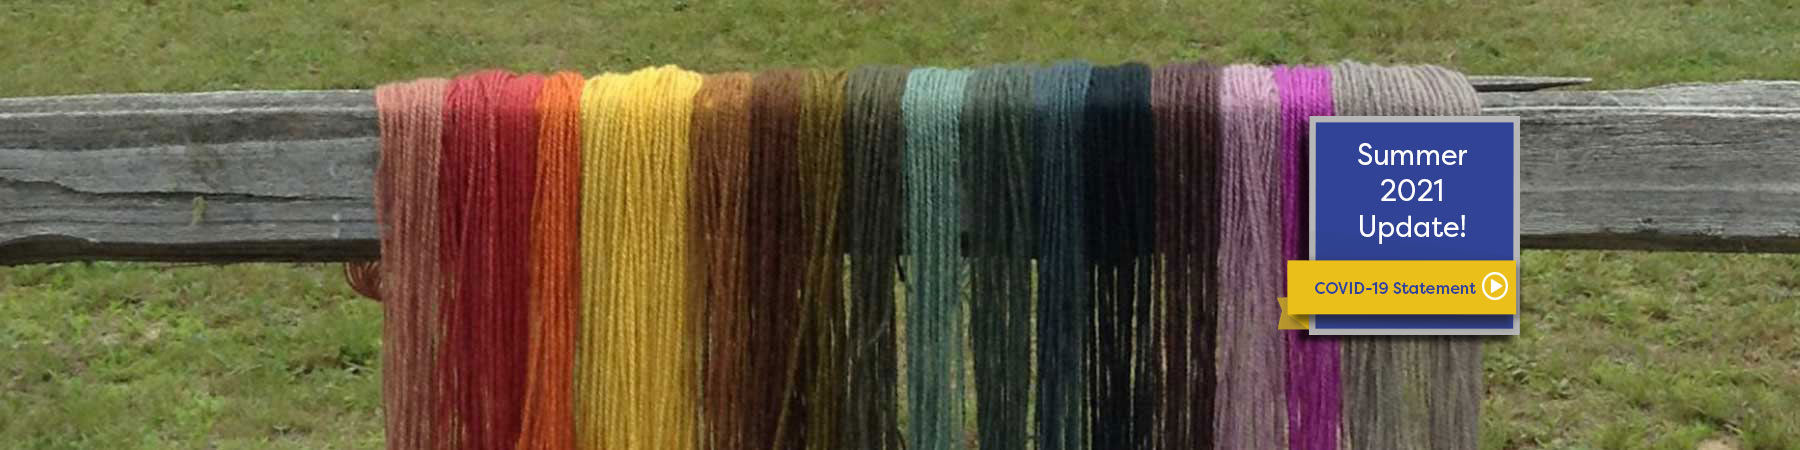 multi colored dyed wool drying on wooden fence